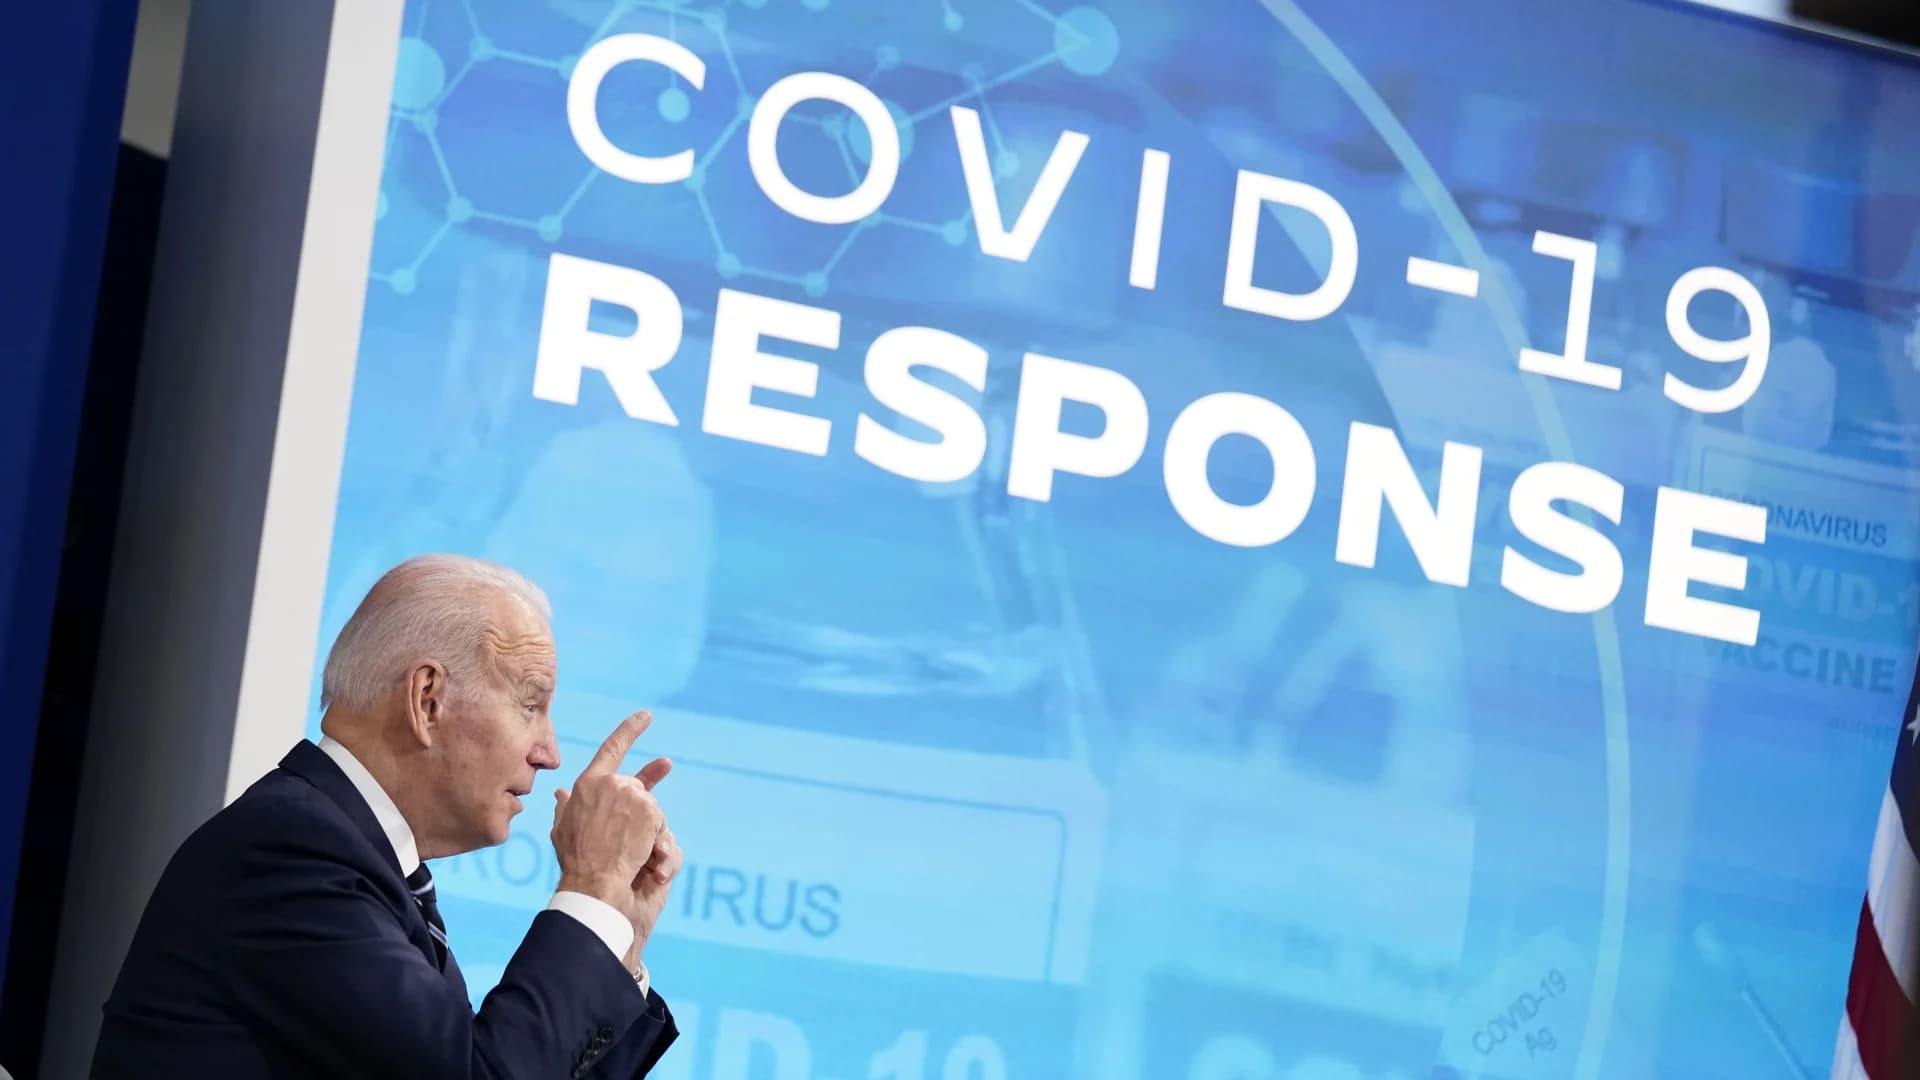 Americans can order free COVID tests next week, 4 tests per home